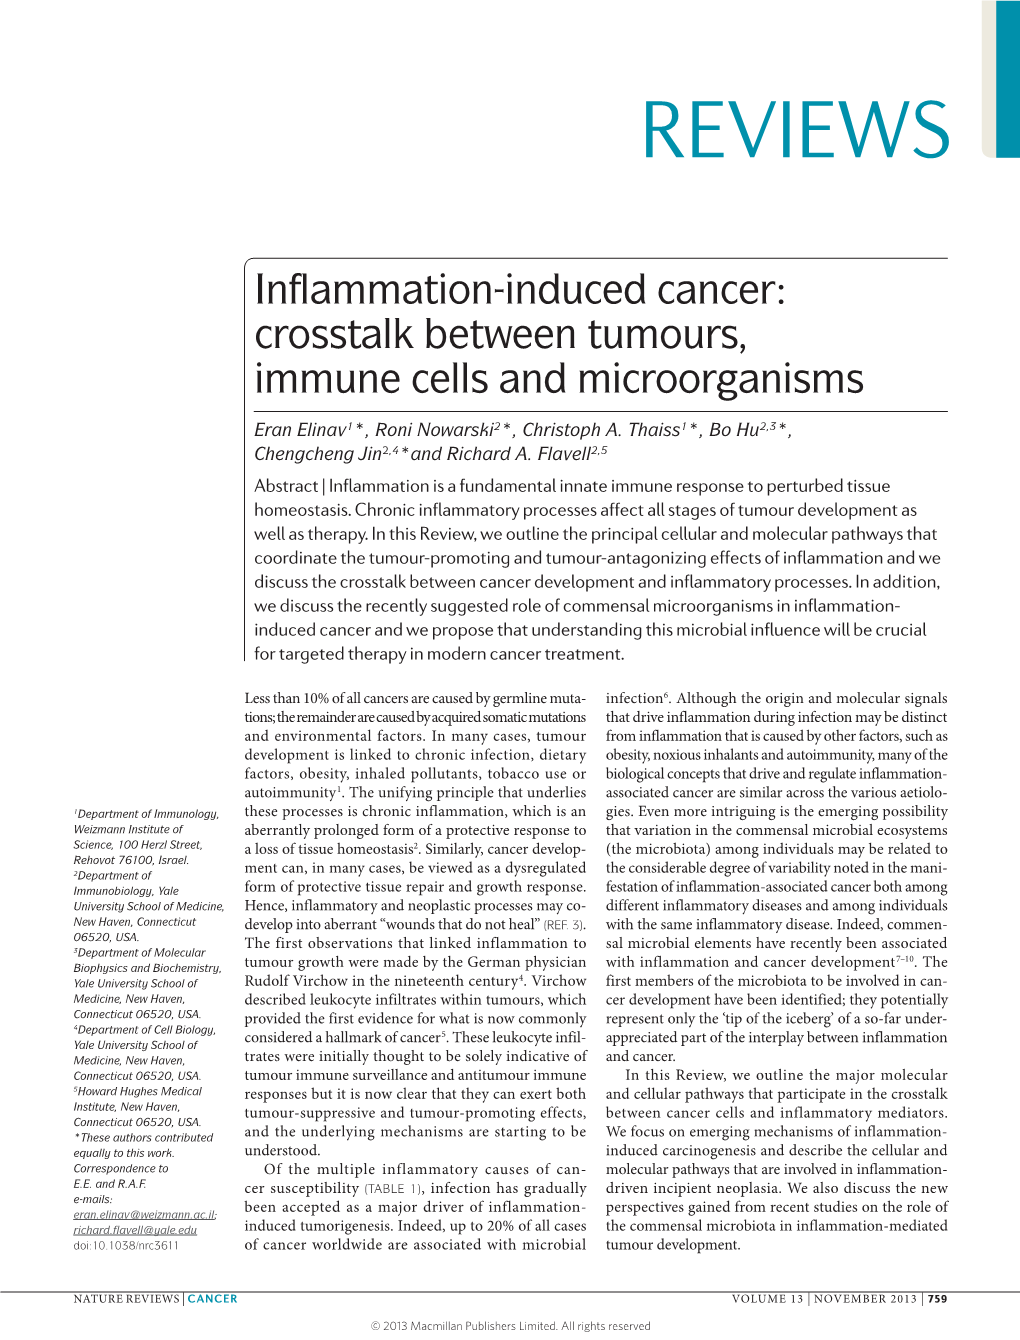 Inflammation-Induced Cancer: Crosstalk Between Tumours, Immune Cells and Microorganisms